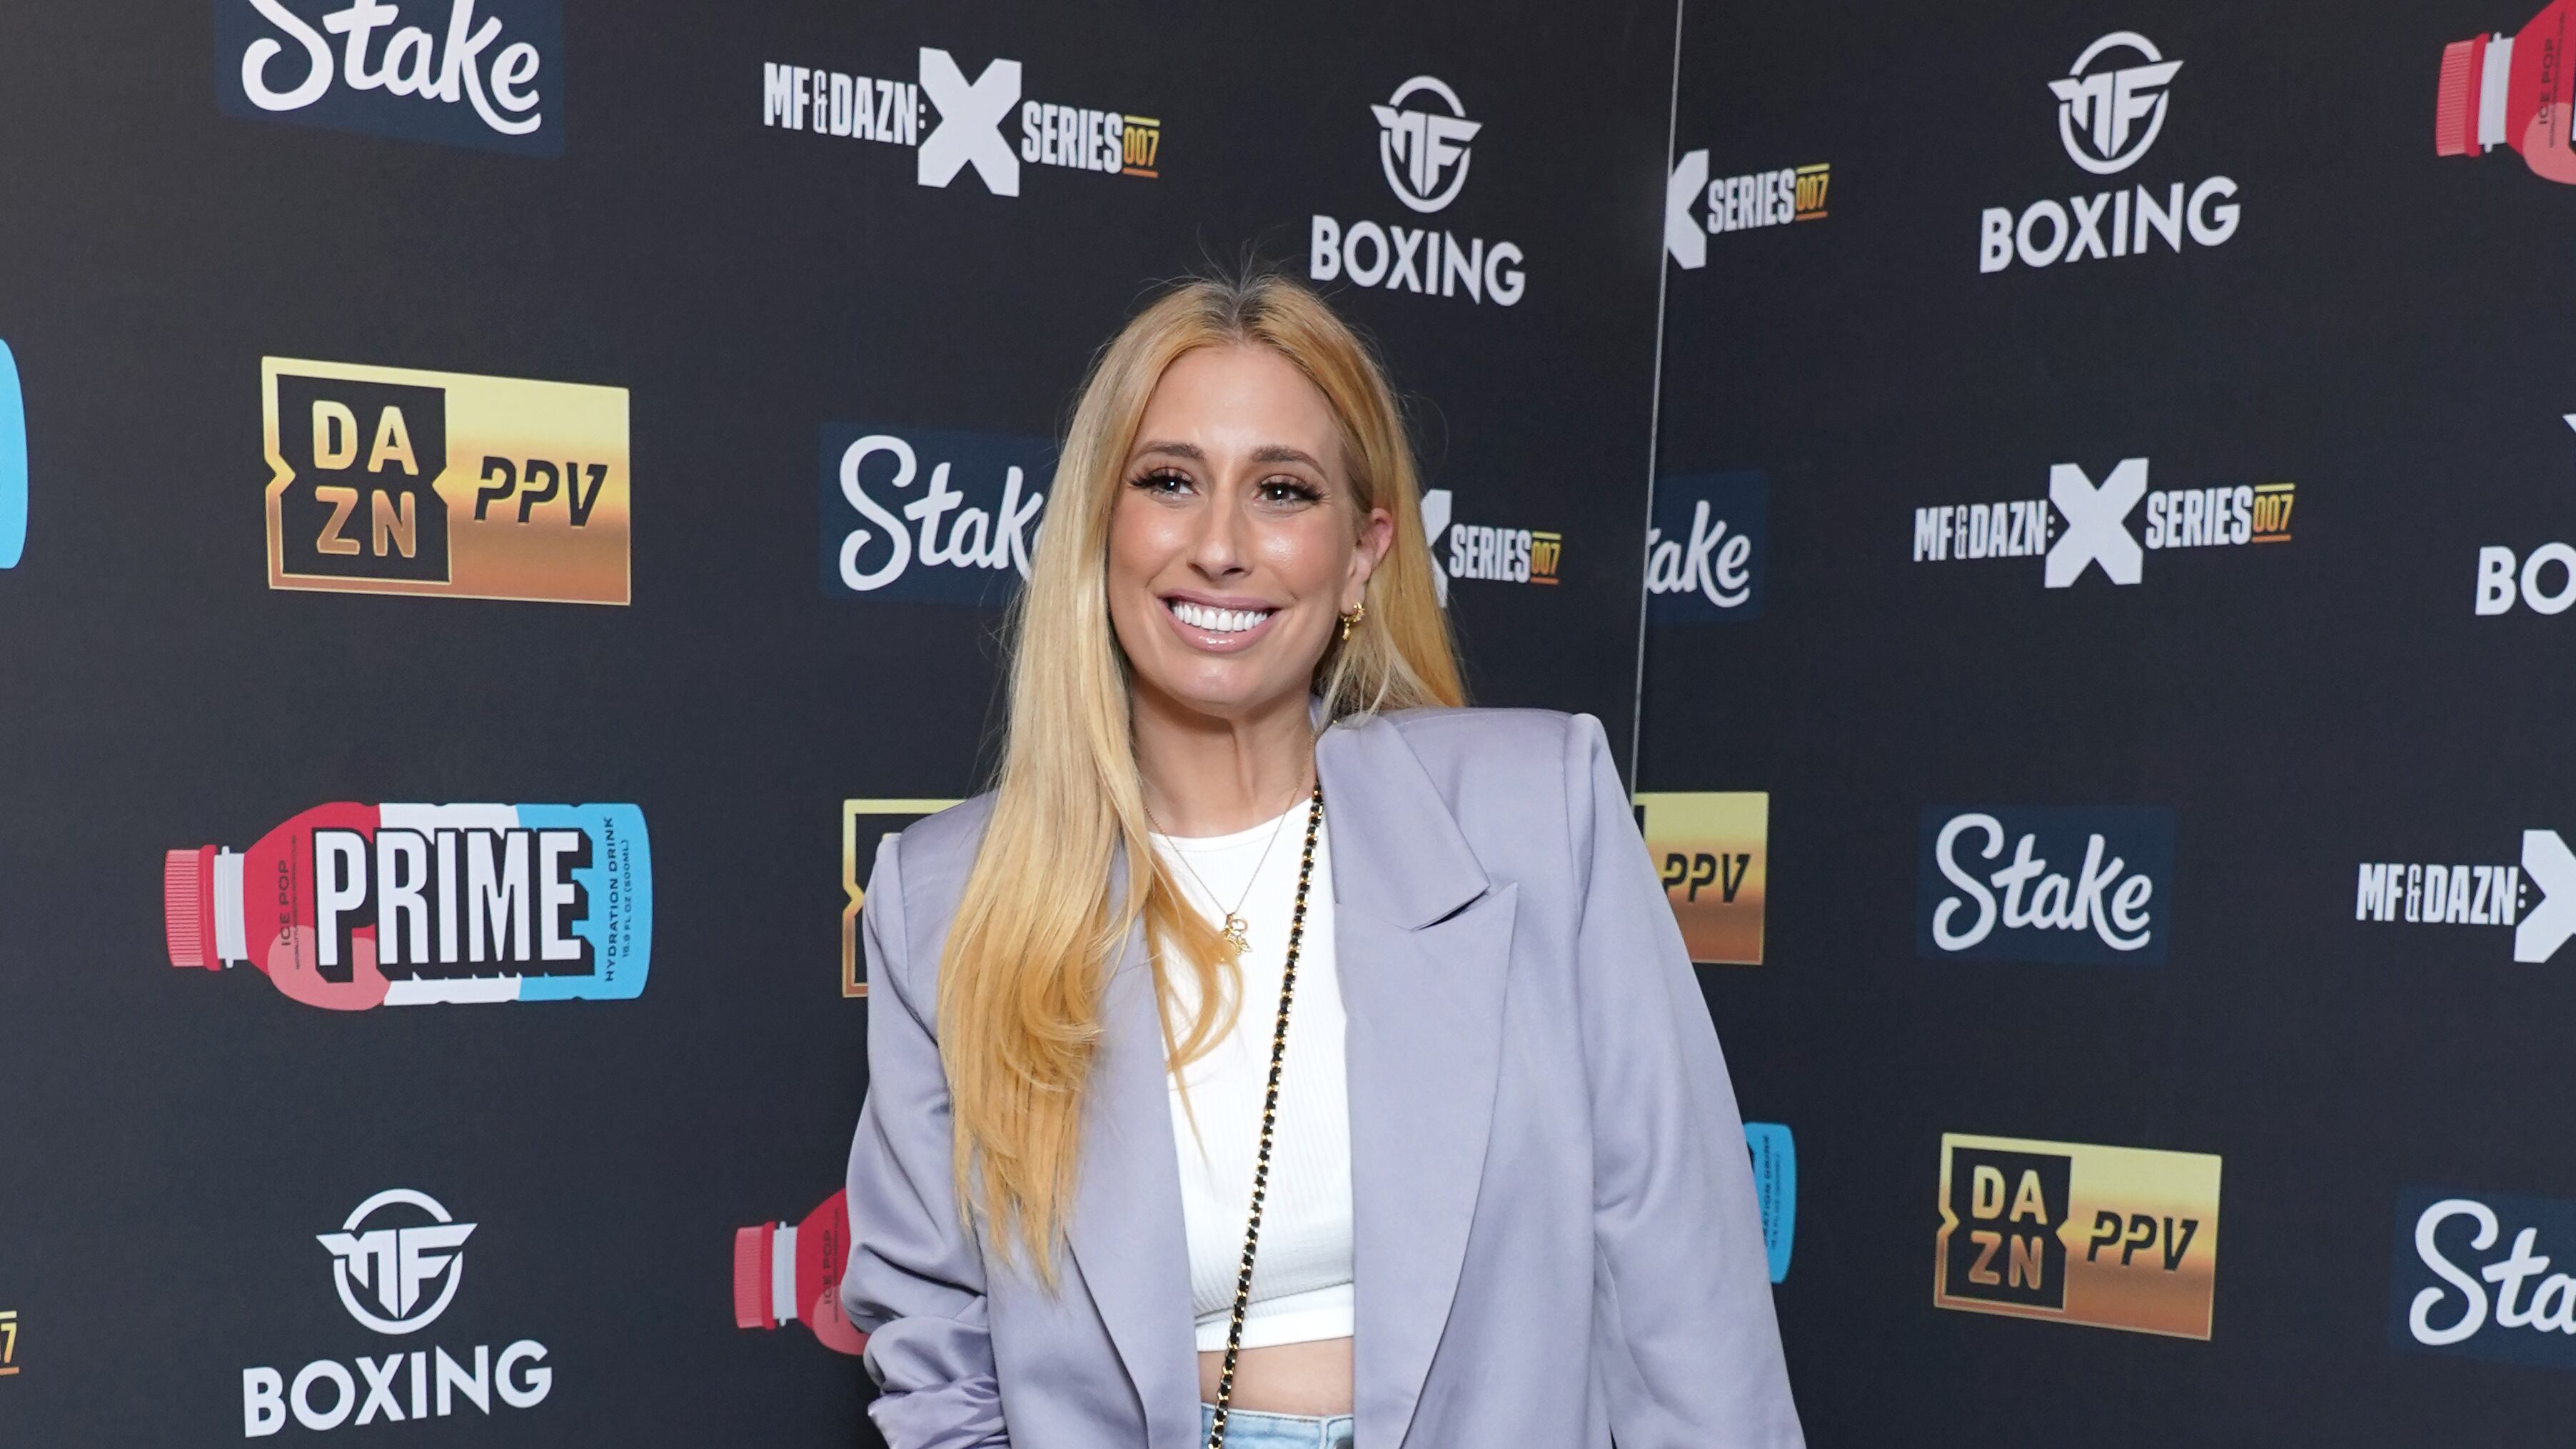 Stacey Solomon has said she was taken to hospital while in Jamaica